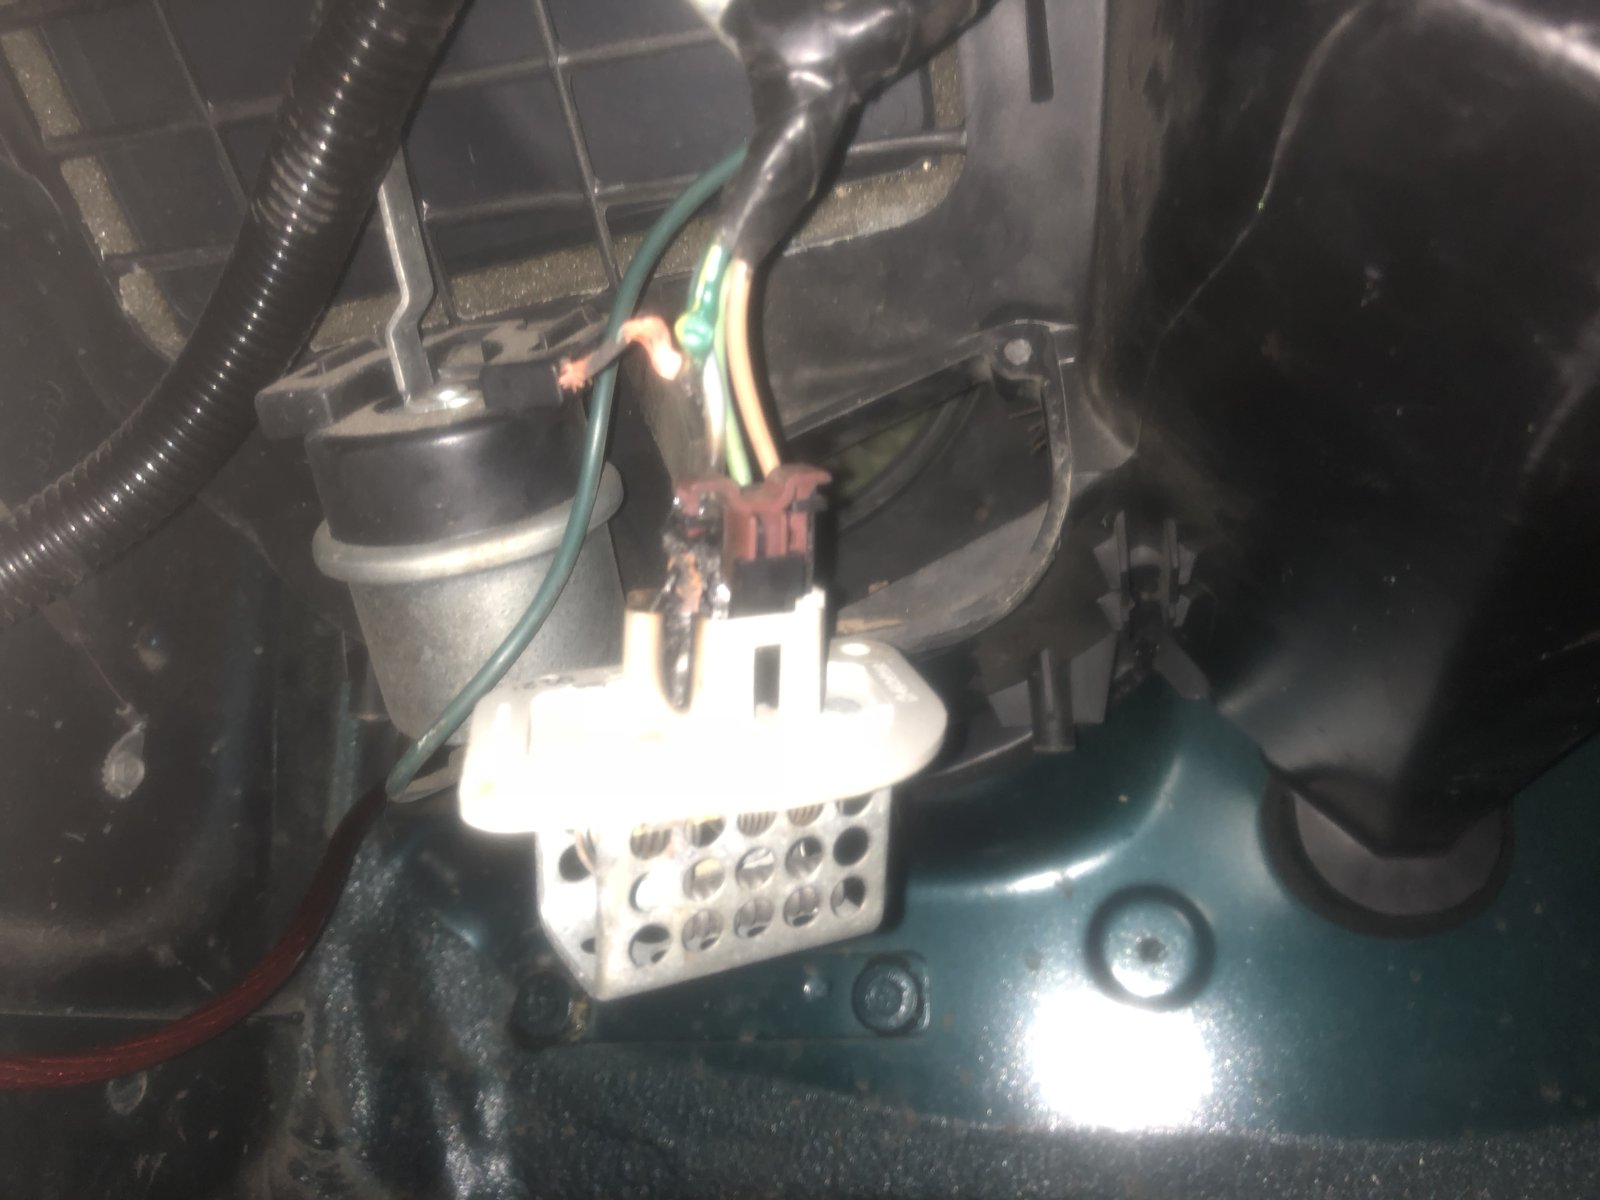 Burnt Out Wiring While Trying To Find Blower Motor Resistor Jeep Wrangler Tj Forum